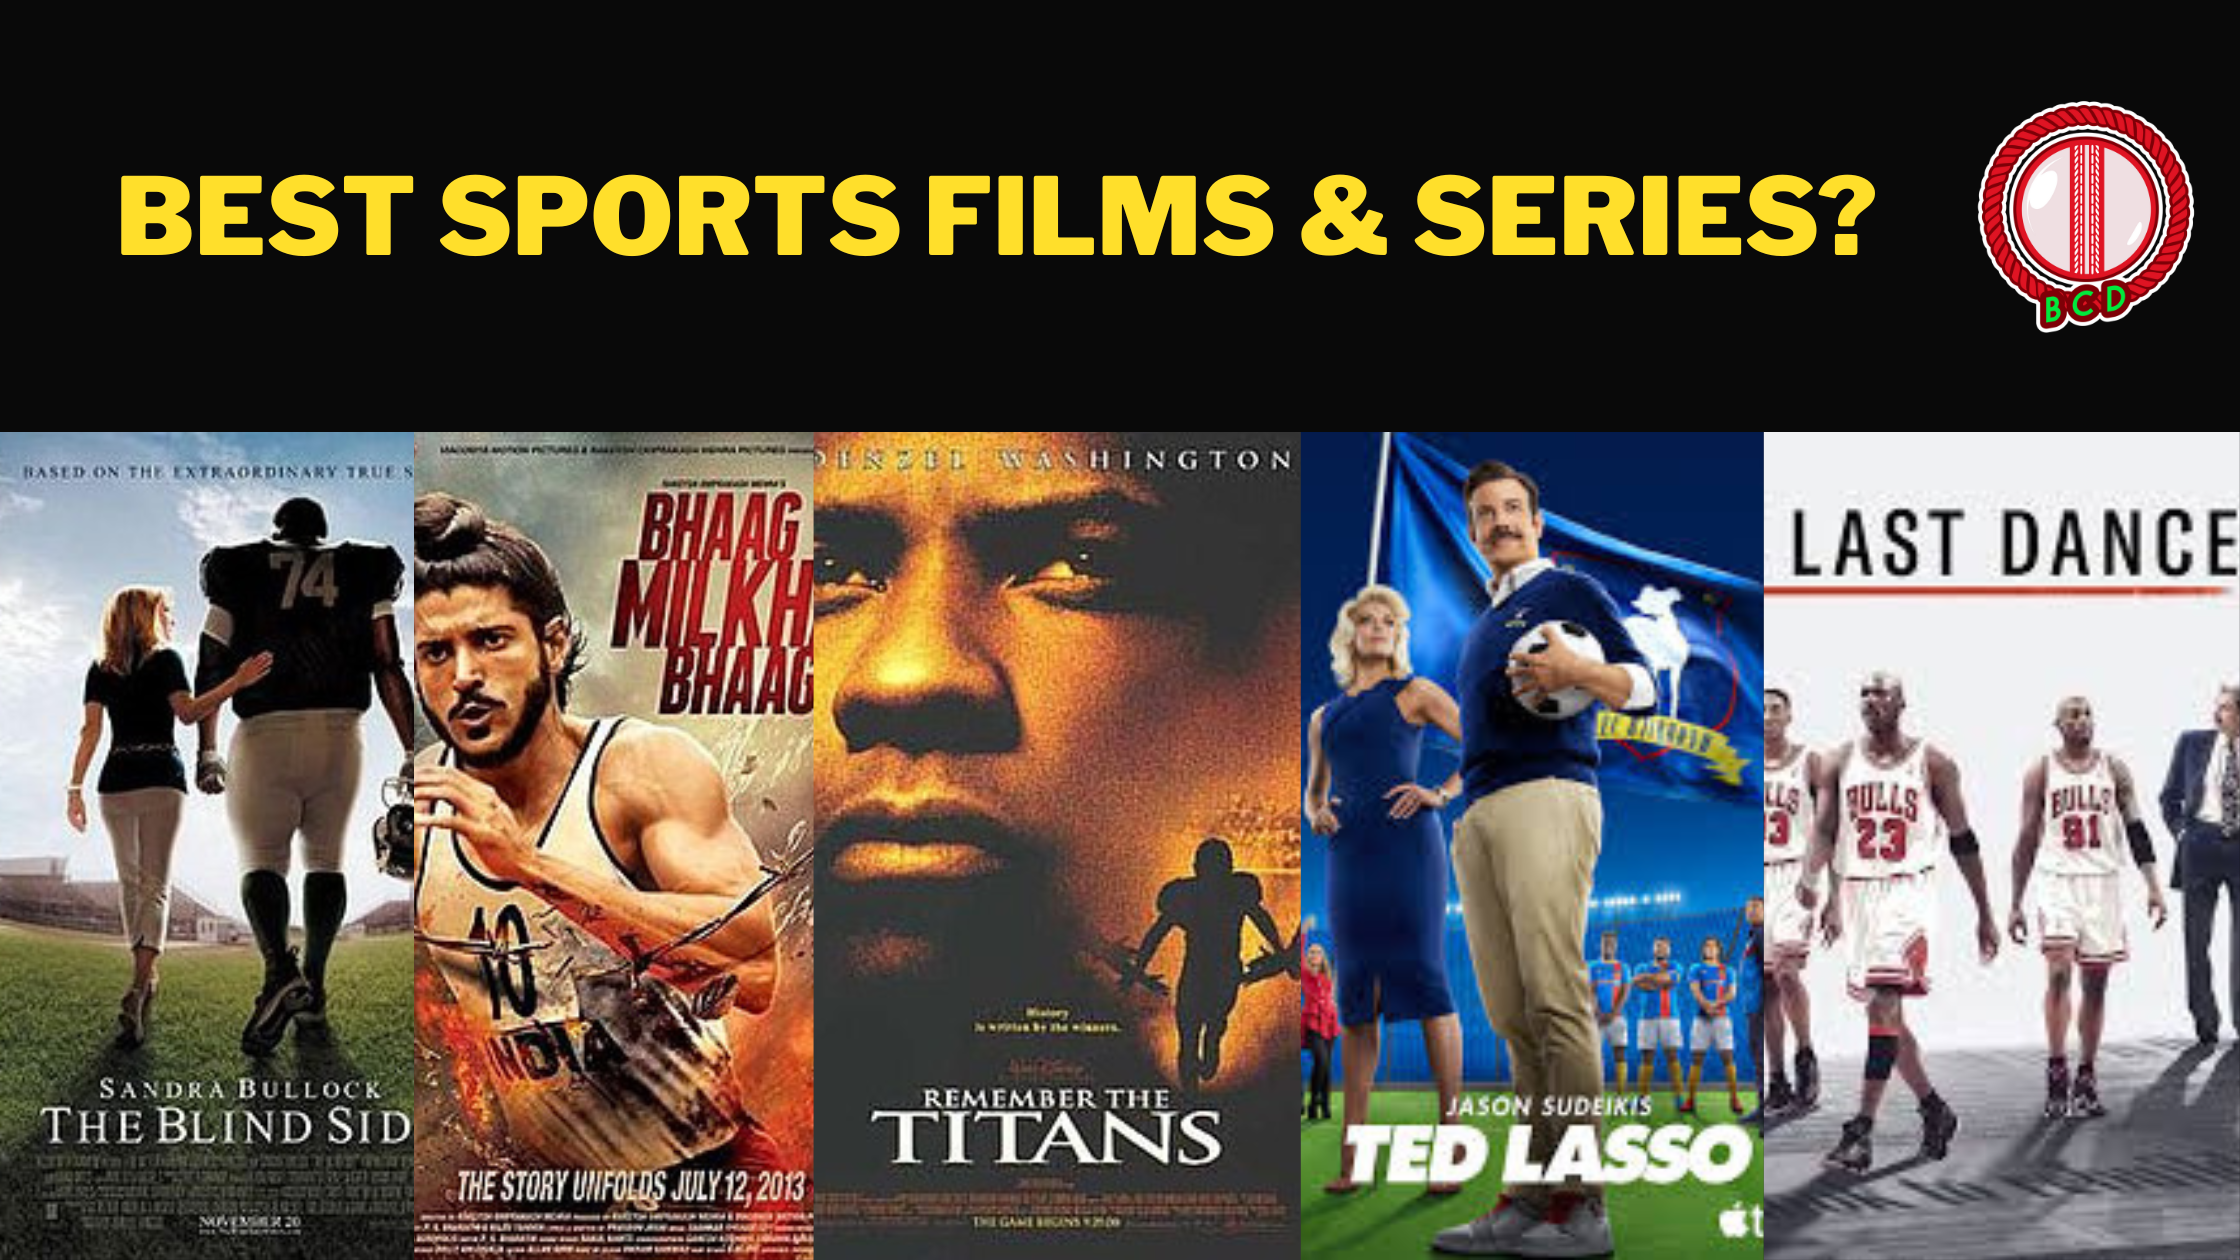 57 Best Sport Movies, TV Shows, & Documentaries (Updated 2022) – Hollywood & Bollywood Combined